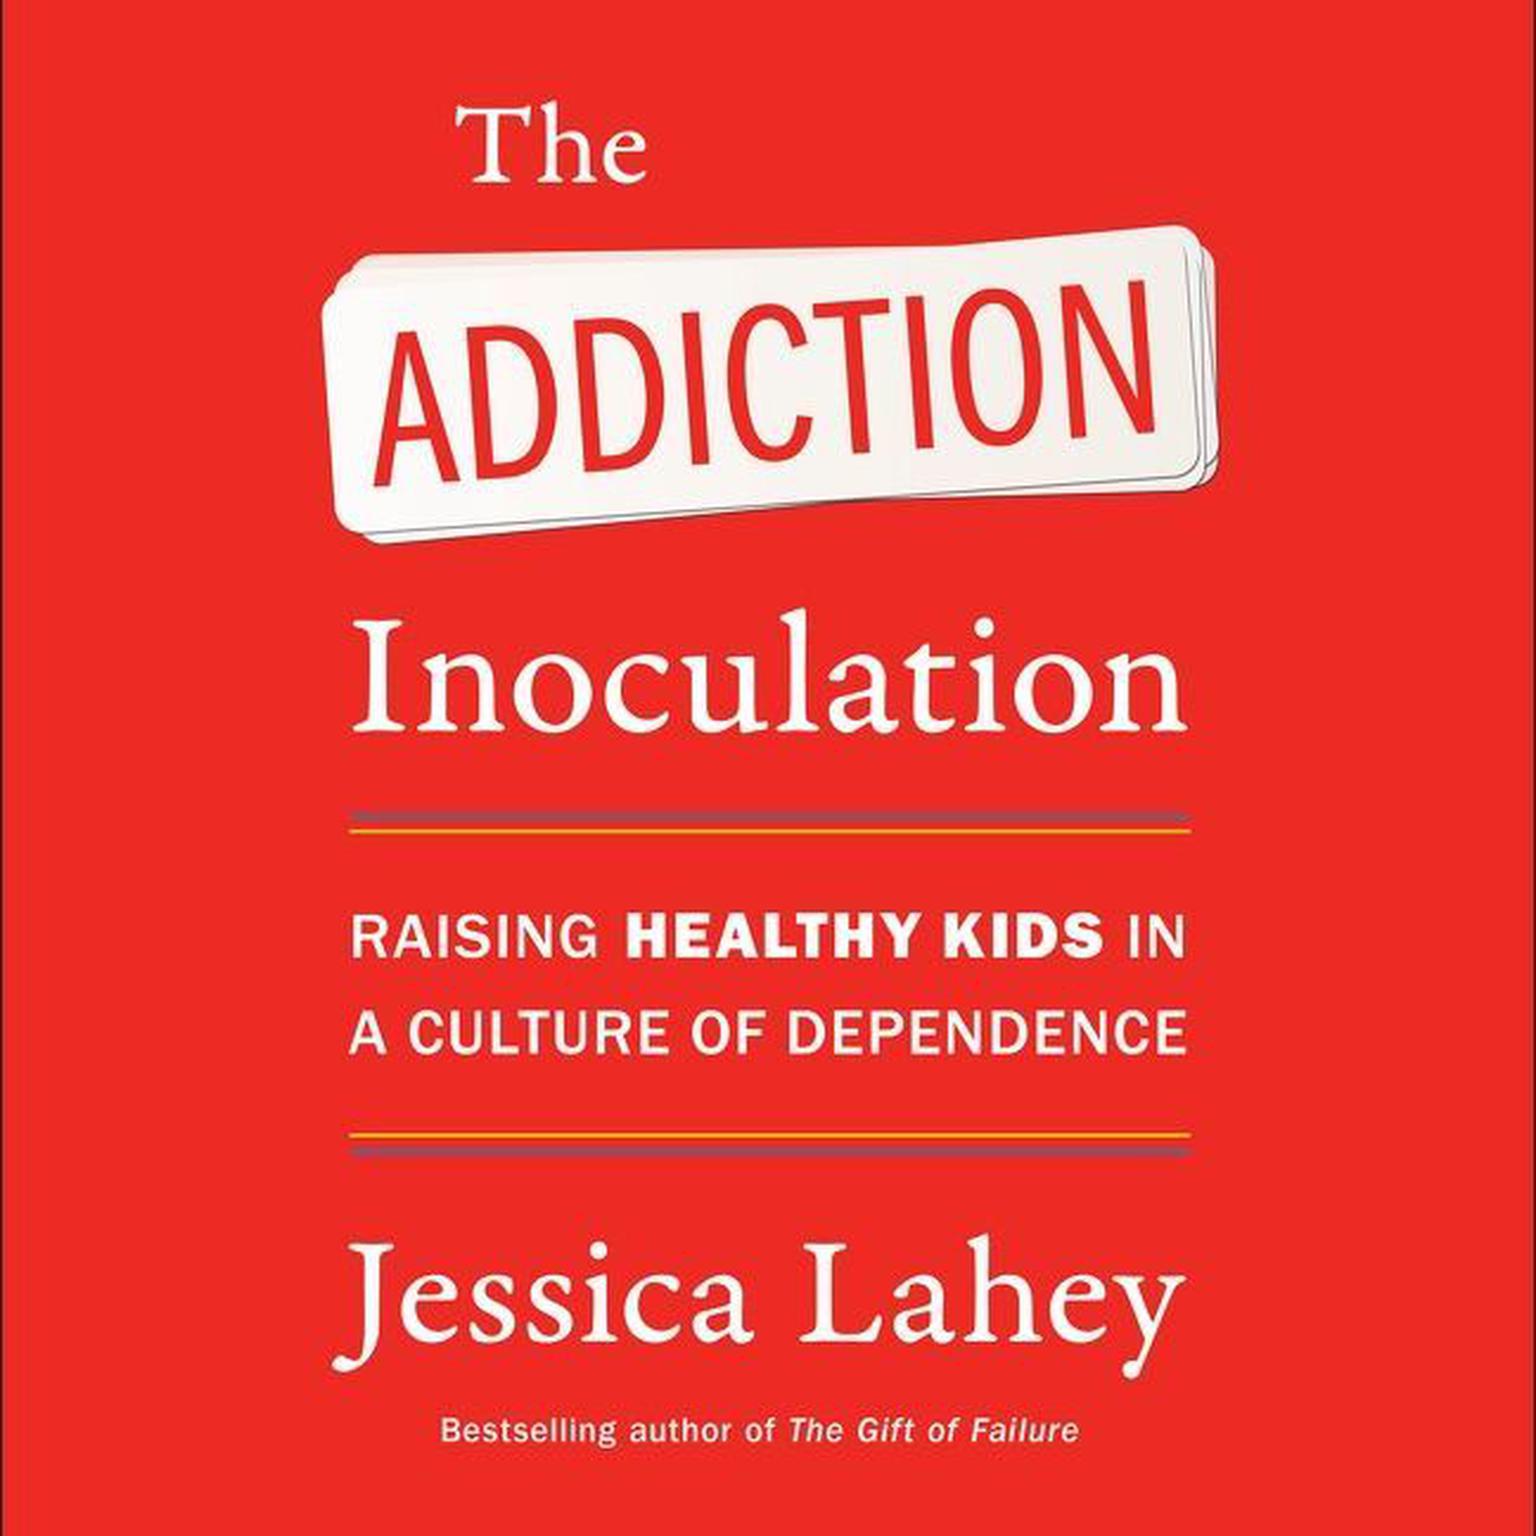 The Addiction Inoculation: Raising Healthy Kids in a Culture of Dependence Audiobook, by Jessica Lahey